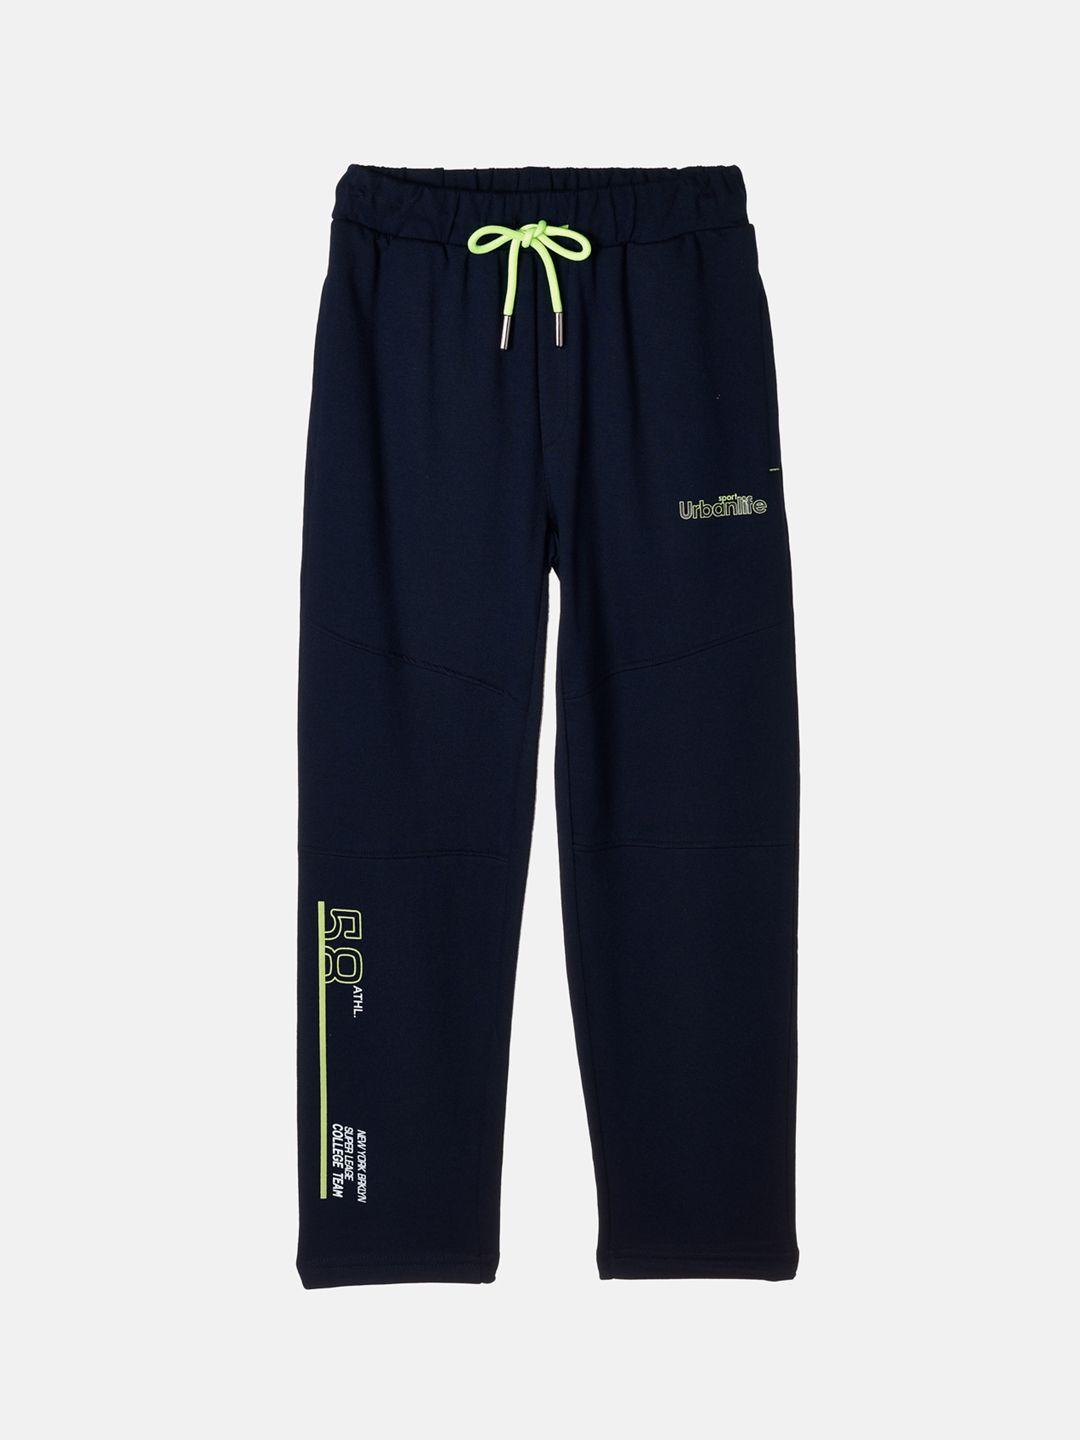 monte carlo boys navy blue & white solid track pants